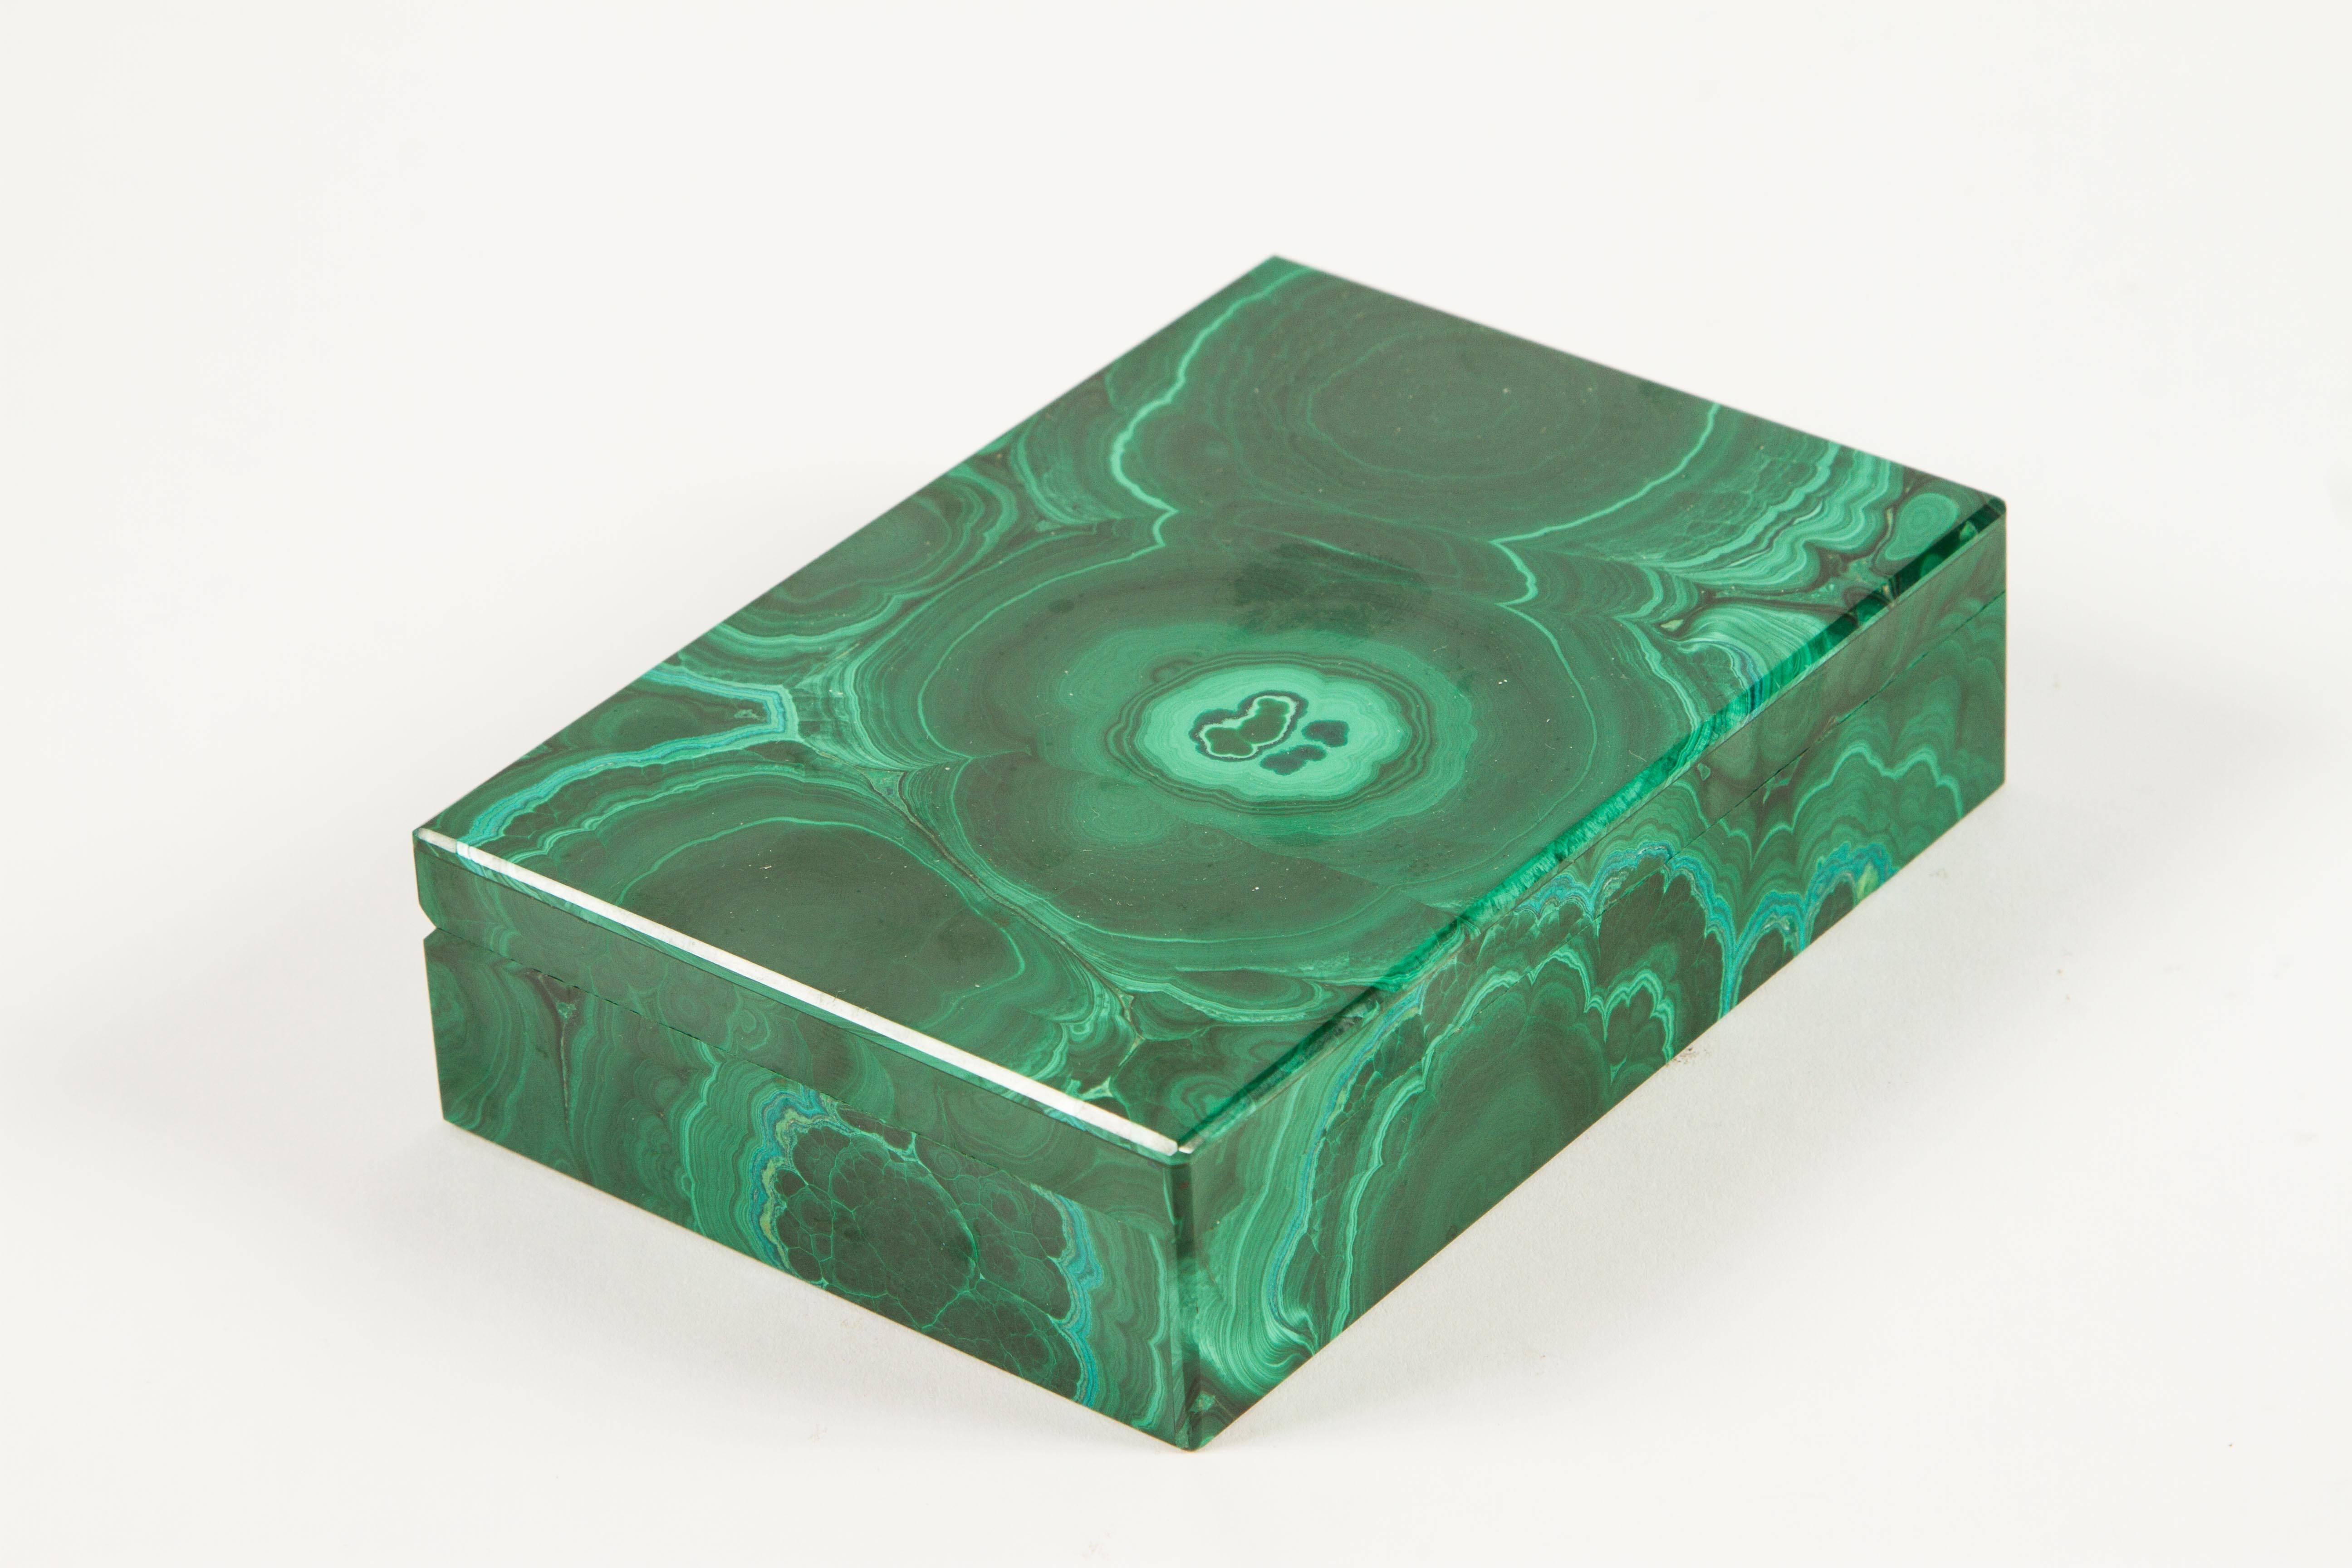 An elegant malachite box using full slabs of stone rather than being pieced together this is a special box. The interior is lined in black onyx and the fittings for the hinge are gold-plated.